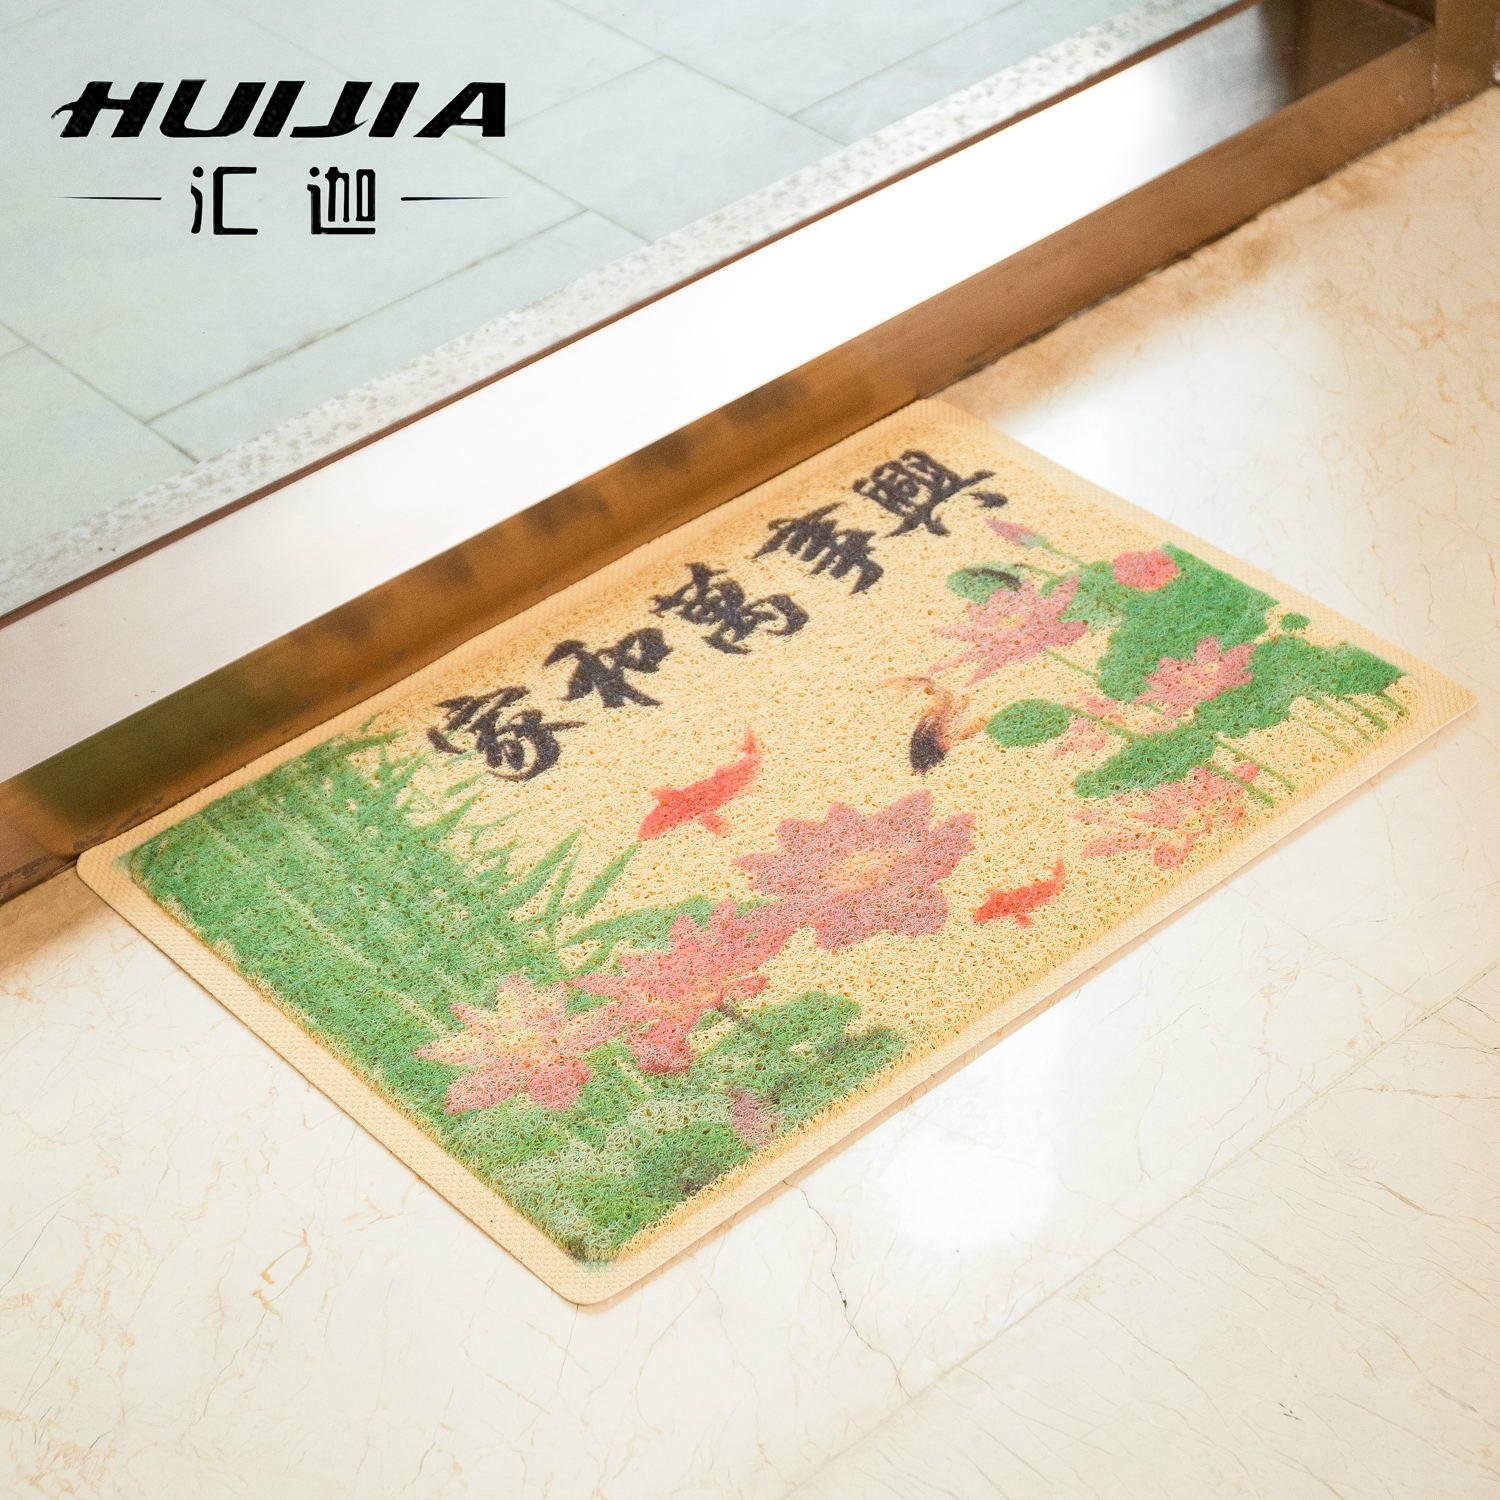 New product colorful printed pvc coil mat outdoor mat  5